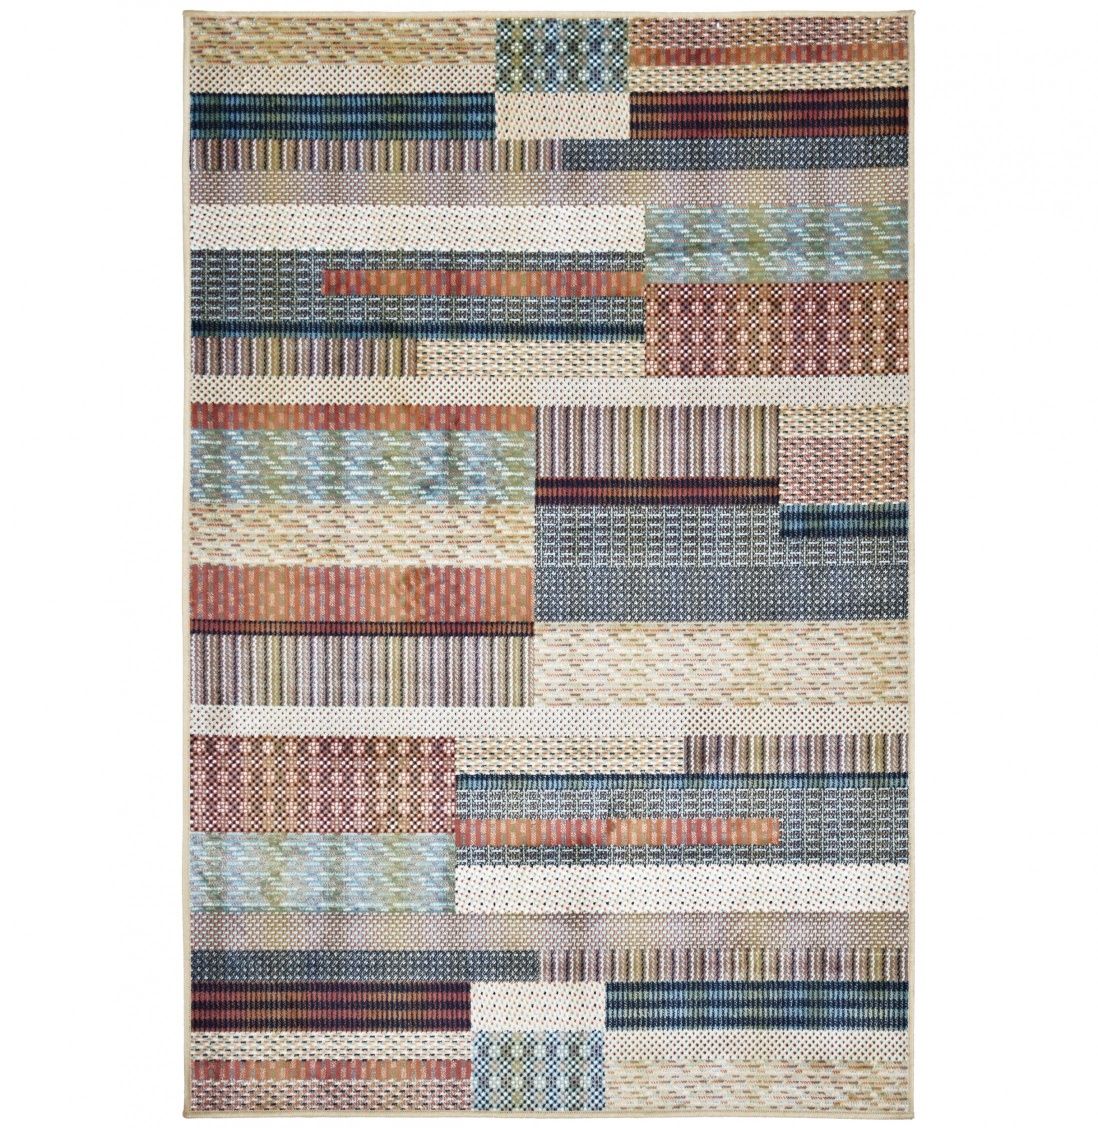 Tapete Royal Classic - 2 Cores - 160x230cm By Arcoazul